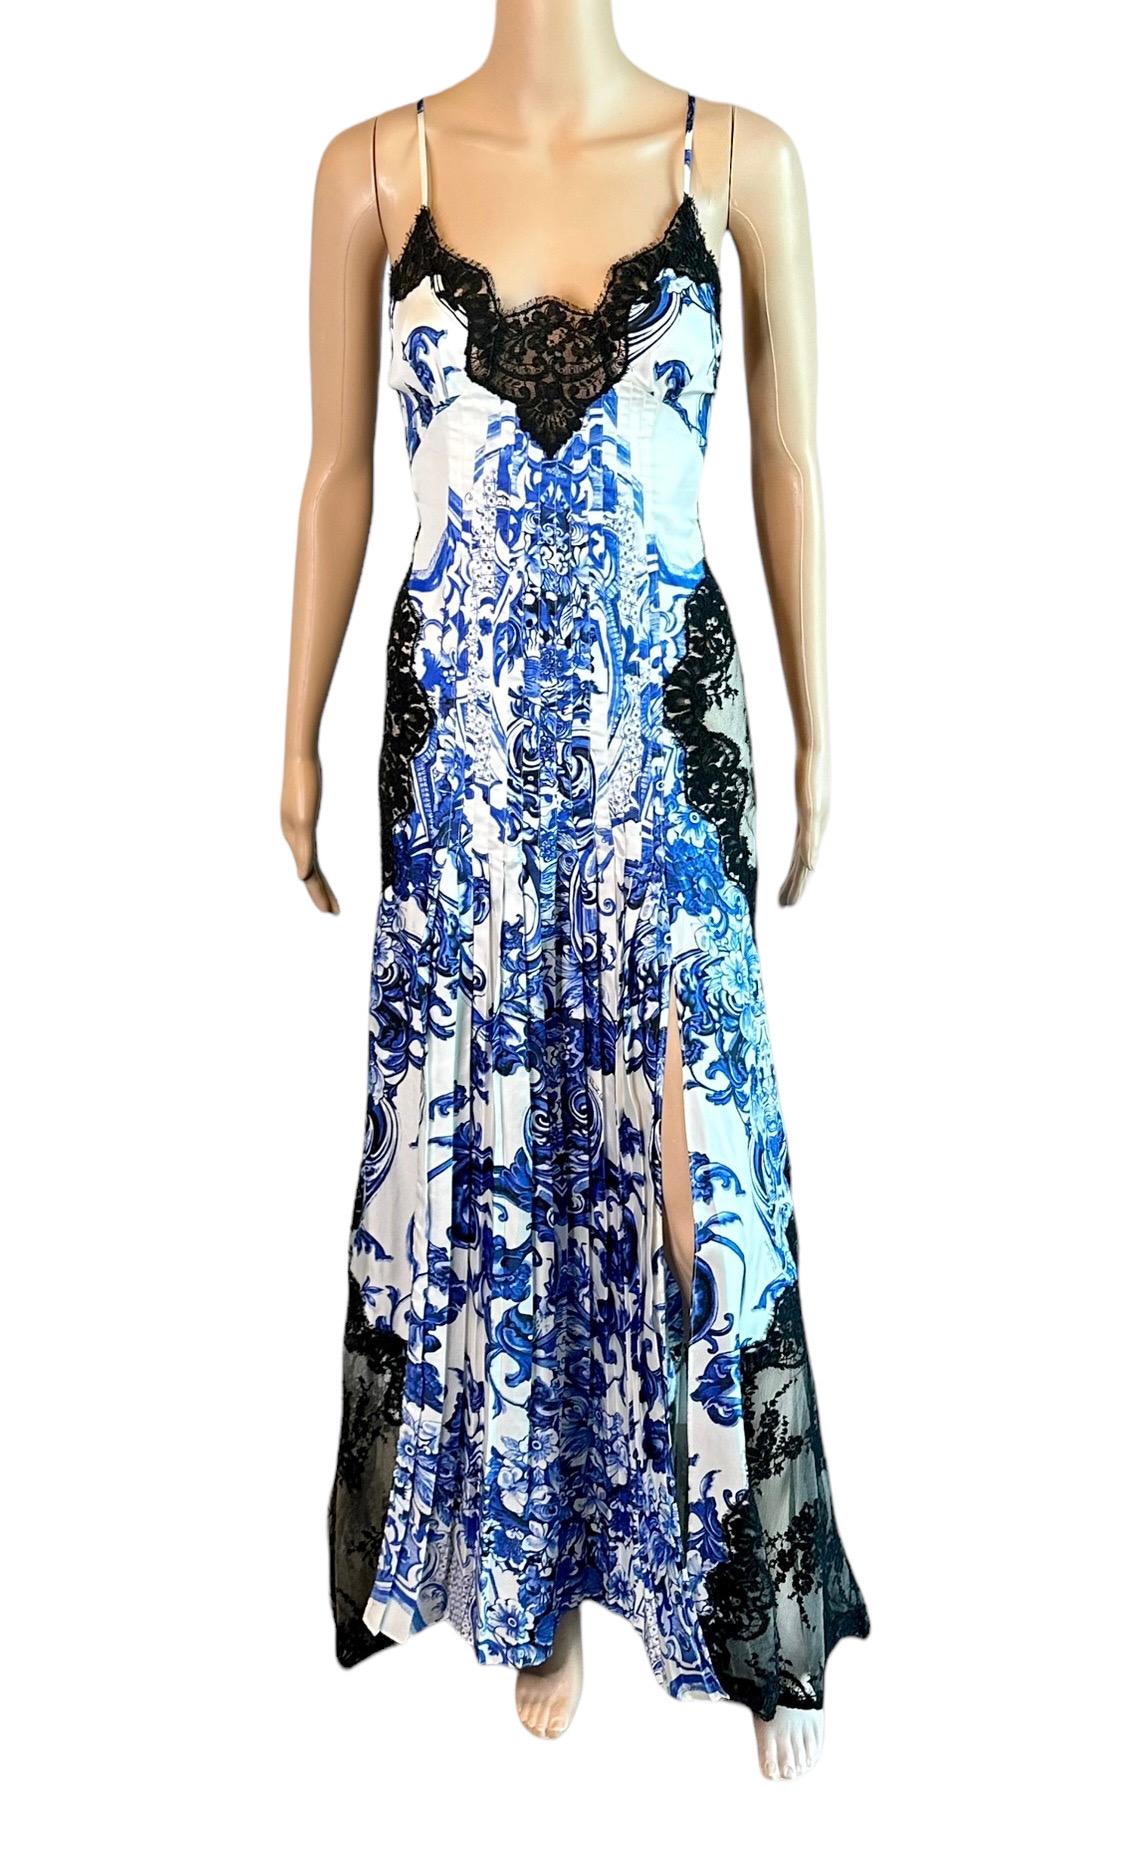 Roberto Cavalli Resort 2013 Chinoiserie Ming Porcelain Sheer Lace Panel Evening Dress 

Condition: Good Condition. Please note size tag is missing.

FOLLOW US ON INSTAGRAM @OPULENTADDICT